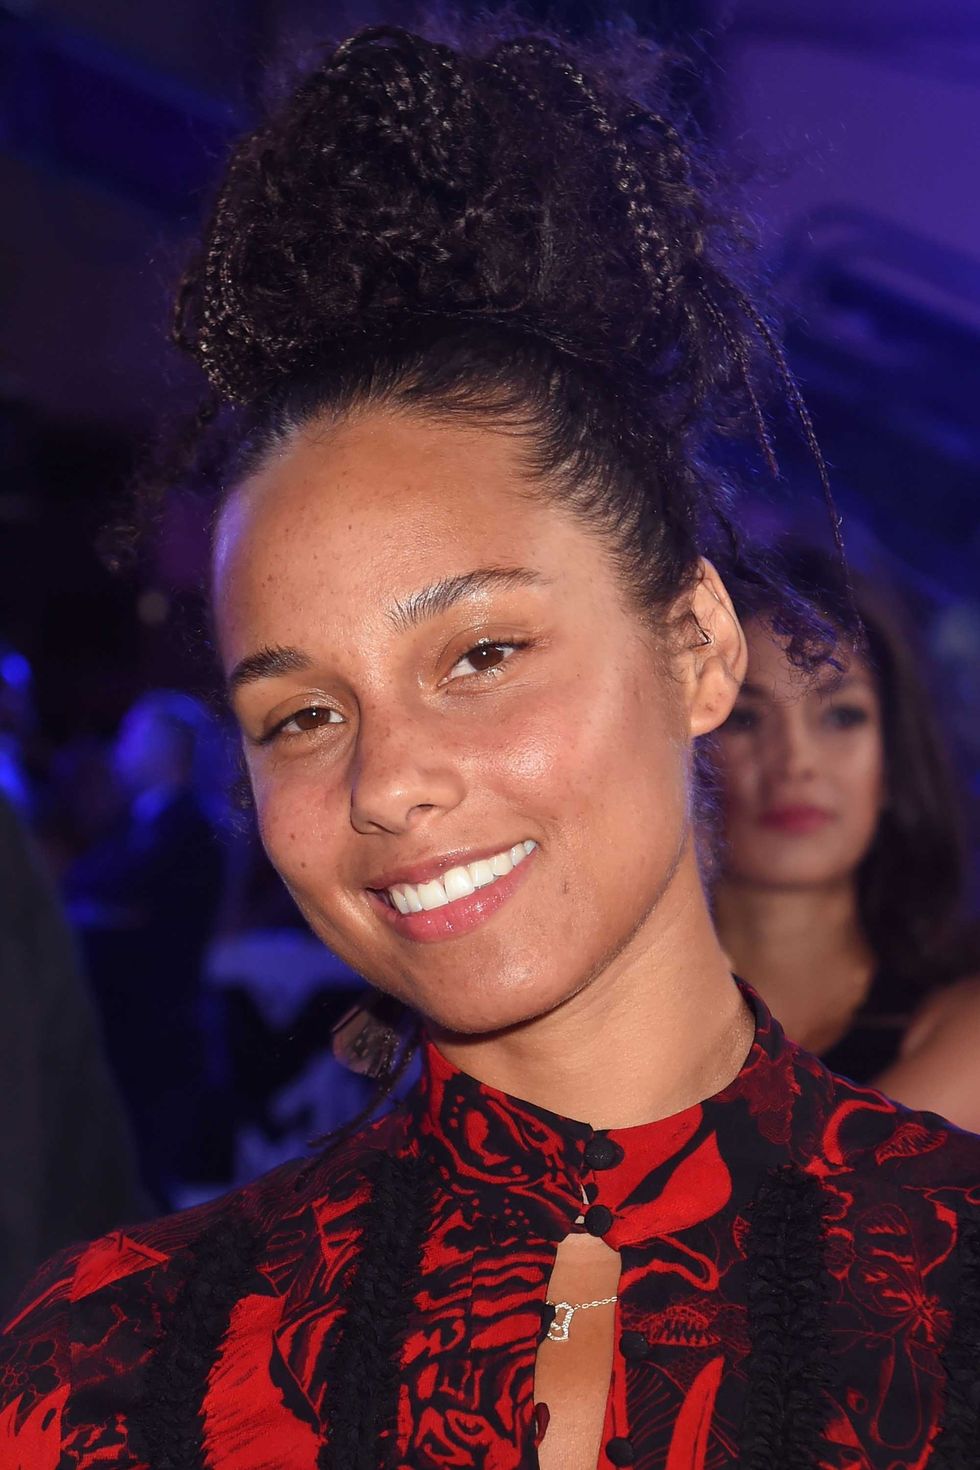 <p>Last May, <a href="http://www.cosmopolitan.co.uk/beauty-hair/makeup/news/a43804/alicia-keys-stopped-wearing-makeup/" target="_blank" data-tracking-id="recirc-text-link">the singer decided to stop wearing makeup</a> as a way to stop trying to fit into society's standards of beauty. She's been showing off her glowing, flawless, bare-faced skin on stage, magazine covers, and red carpets ever since. Her #NoMakeup movement has <a href="http://www.cosmopolitan.co.uk/beauty-hair/celebrity-hair-makeup/a46454/i-tried-alica-keys-no-makeup-products/?visibilityoverride" target="_blank" data-tracking-id="recirc-text-link">inspired many women to truly love the skin they're in</a>. </p>